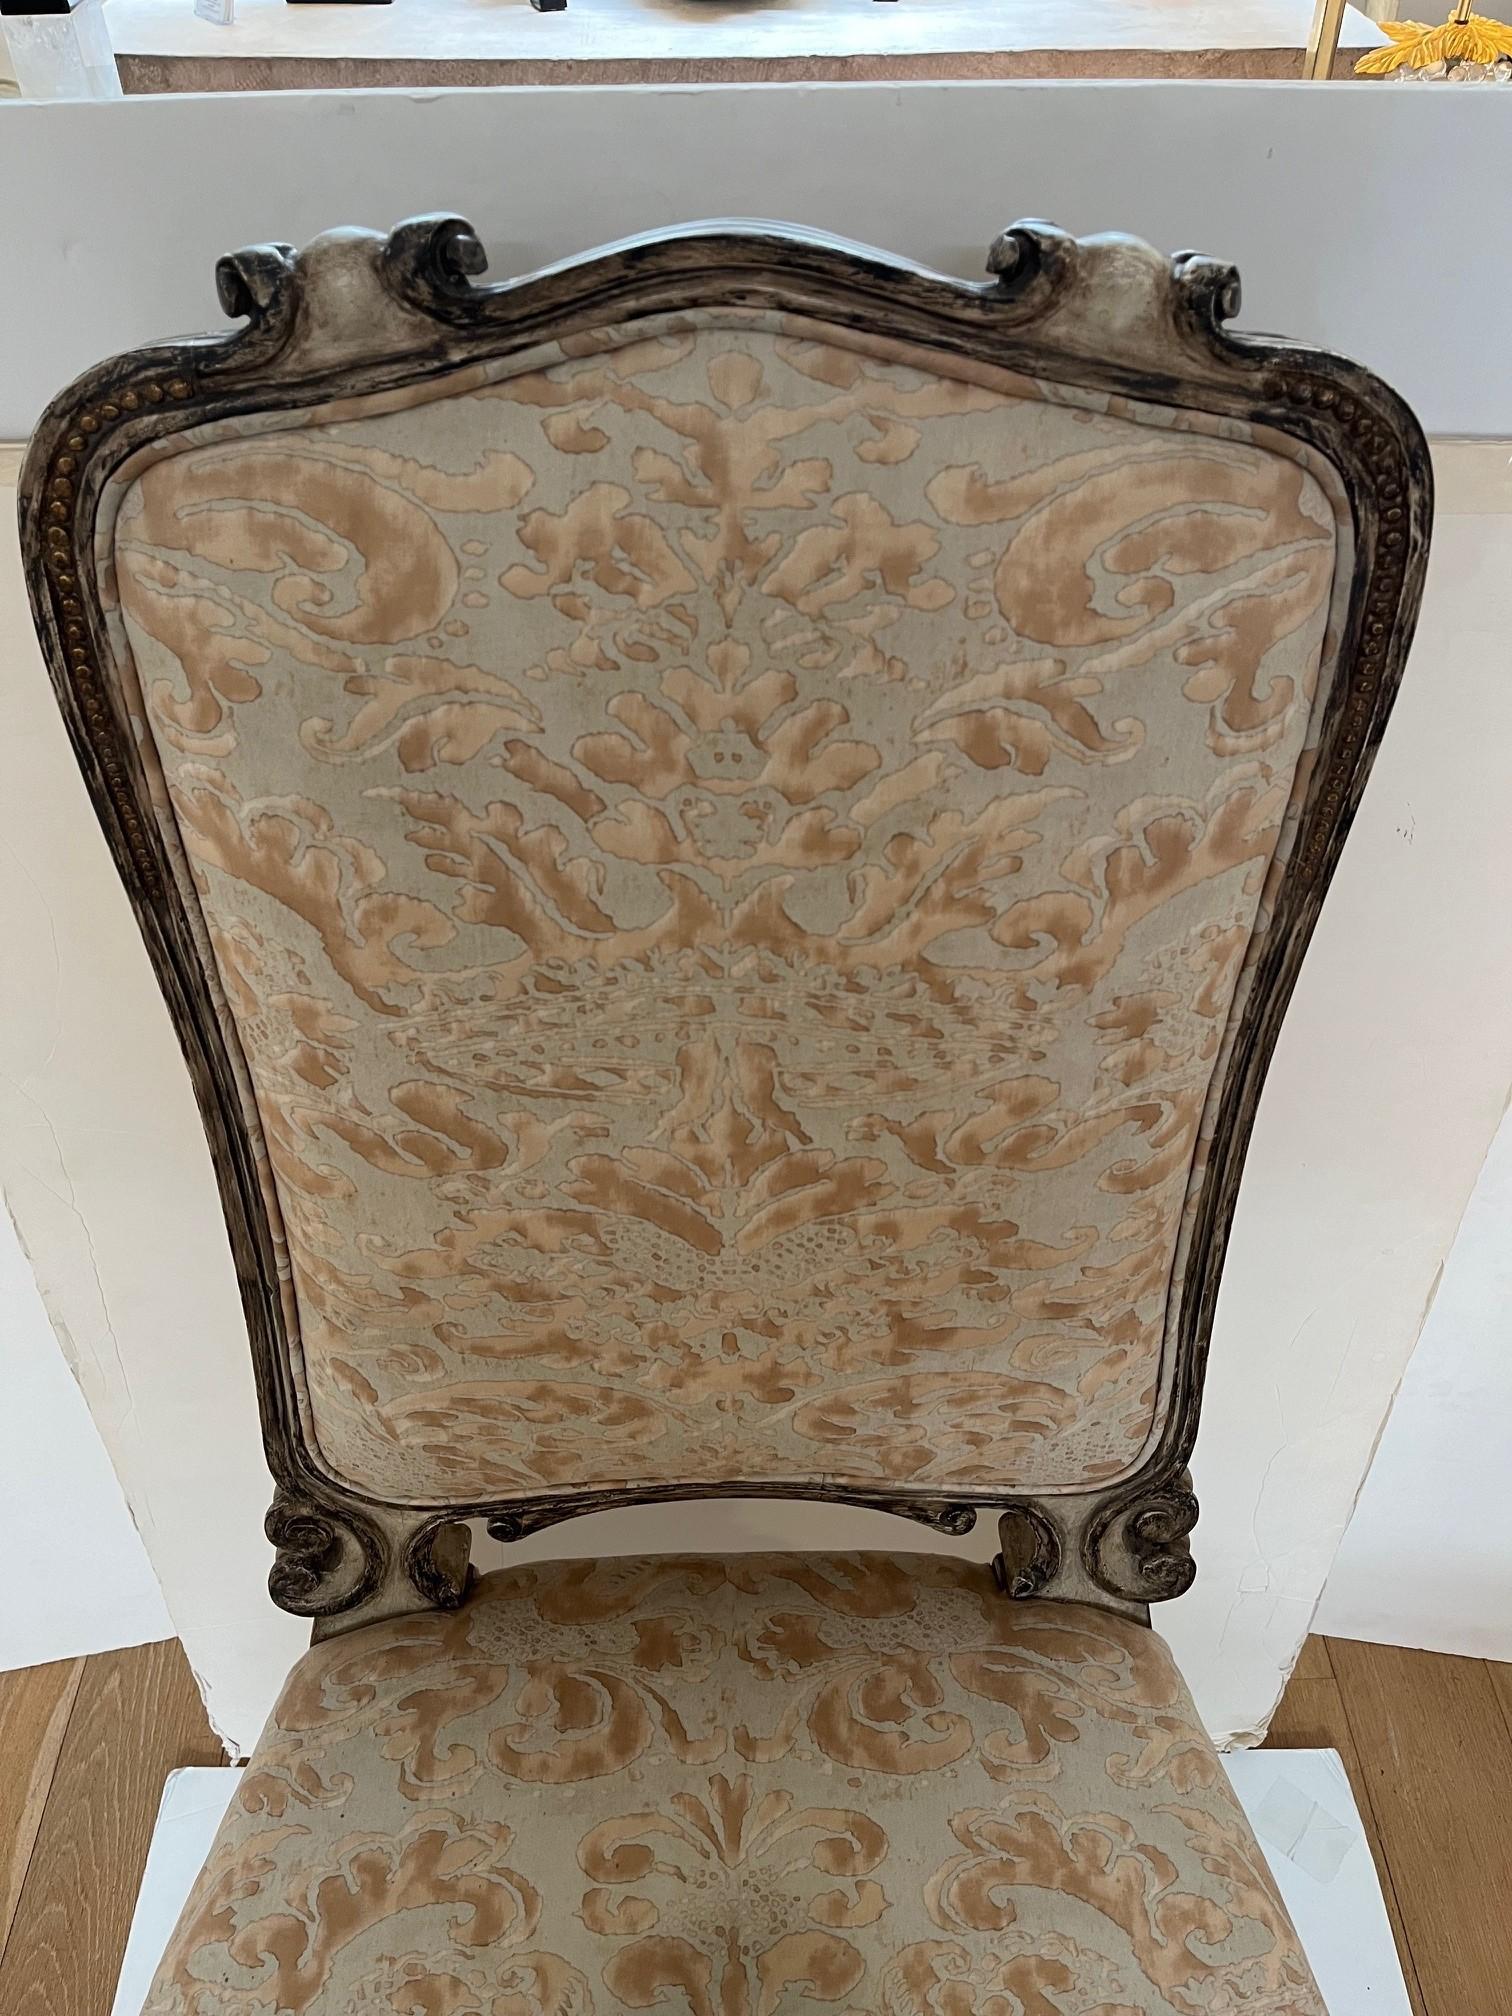 Made to Order Carved Back and Legs Fontain Dining Side Chair, Finish Hand Painted and Gold Leaf Accents and Upholstered in Fortuny Fabric, This a Showroom Model
Upholstery: Customer Own Material